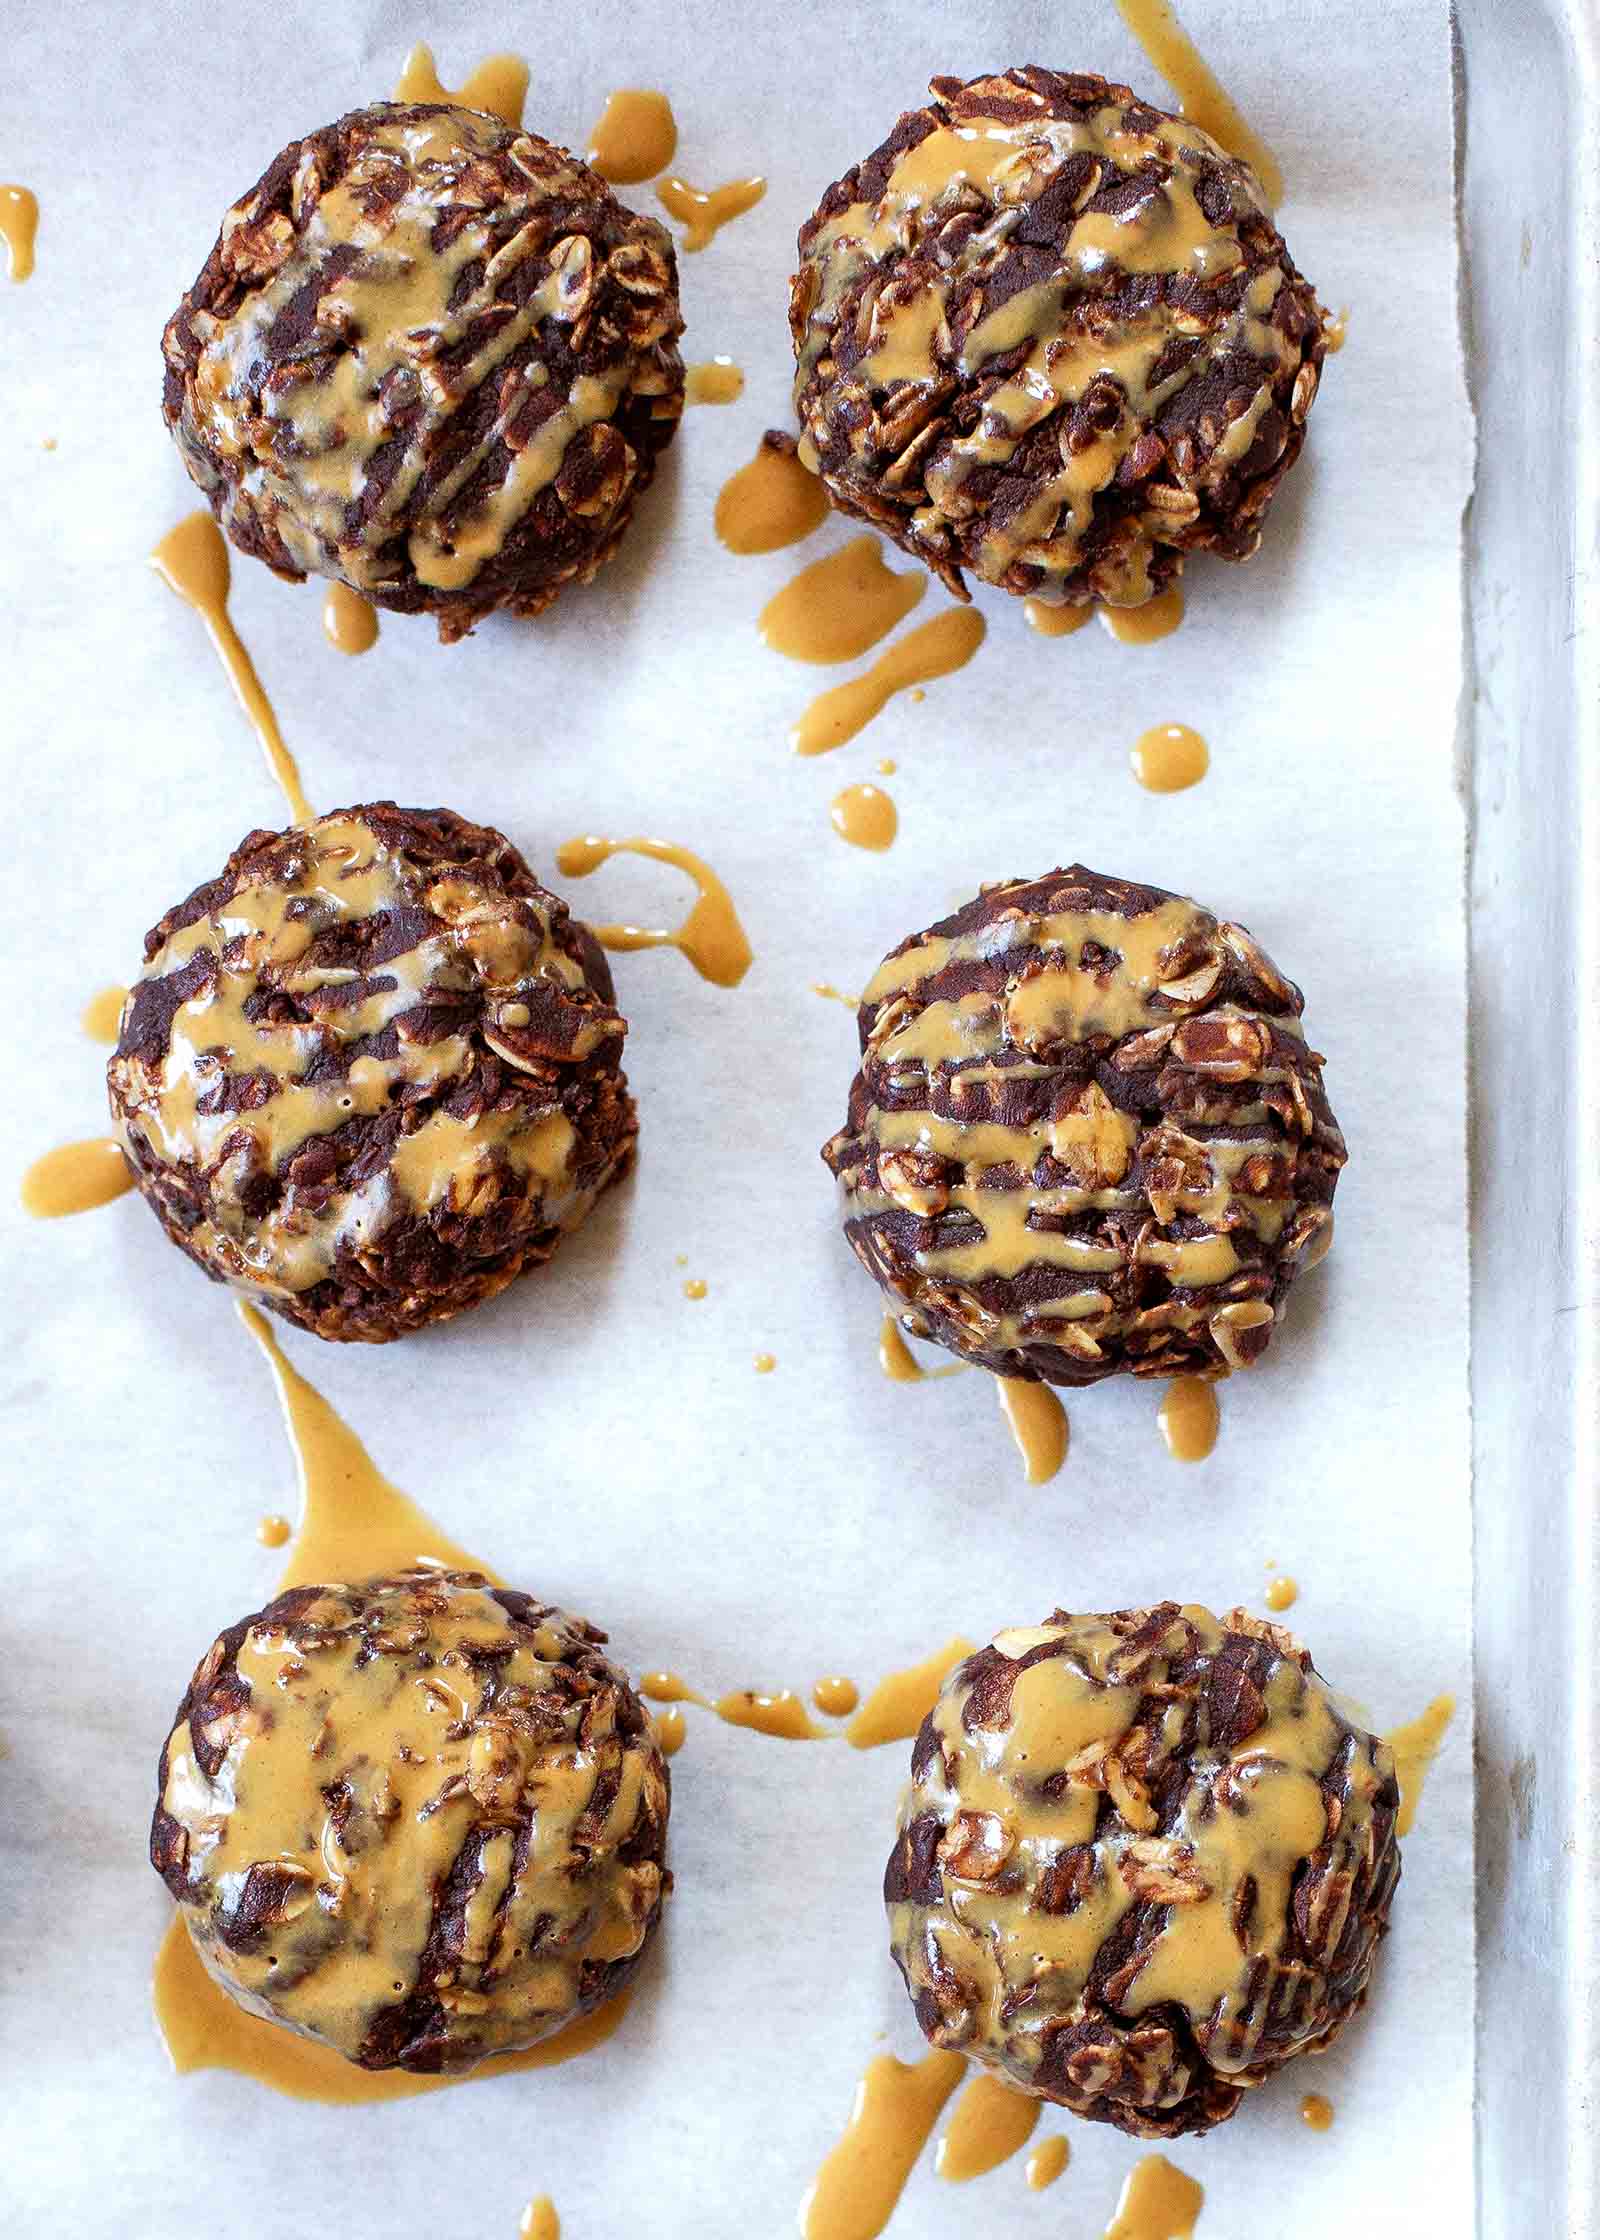 No-Bake Chocolate and Peanut Butter Cookies